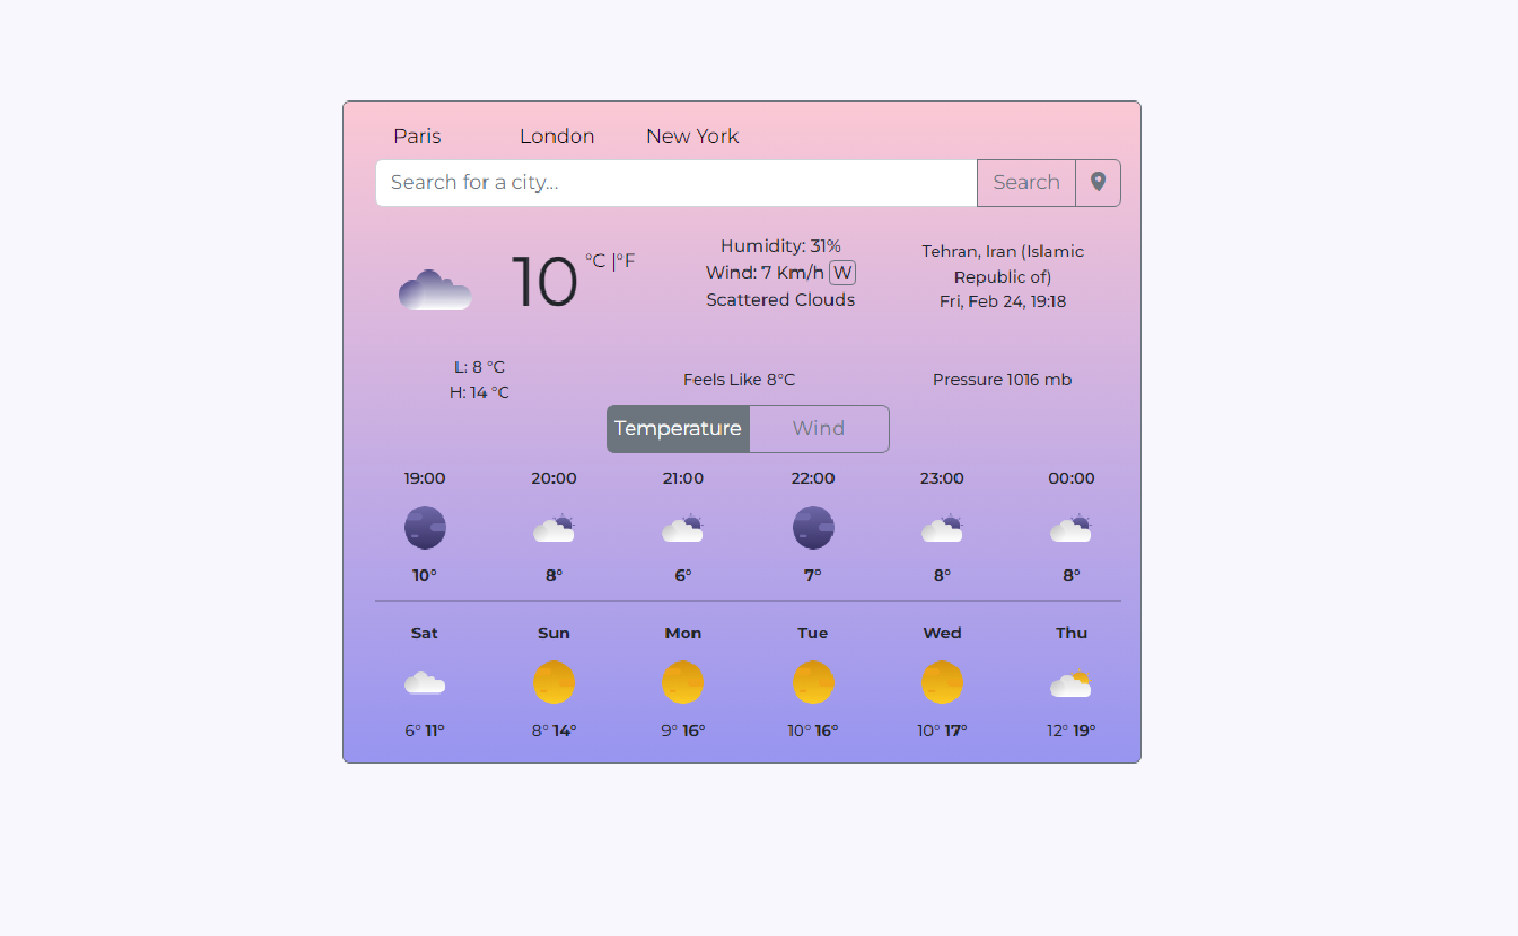 weather application